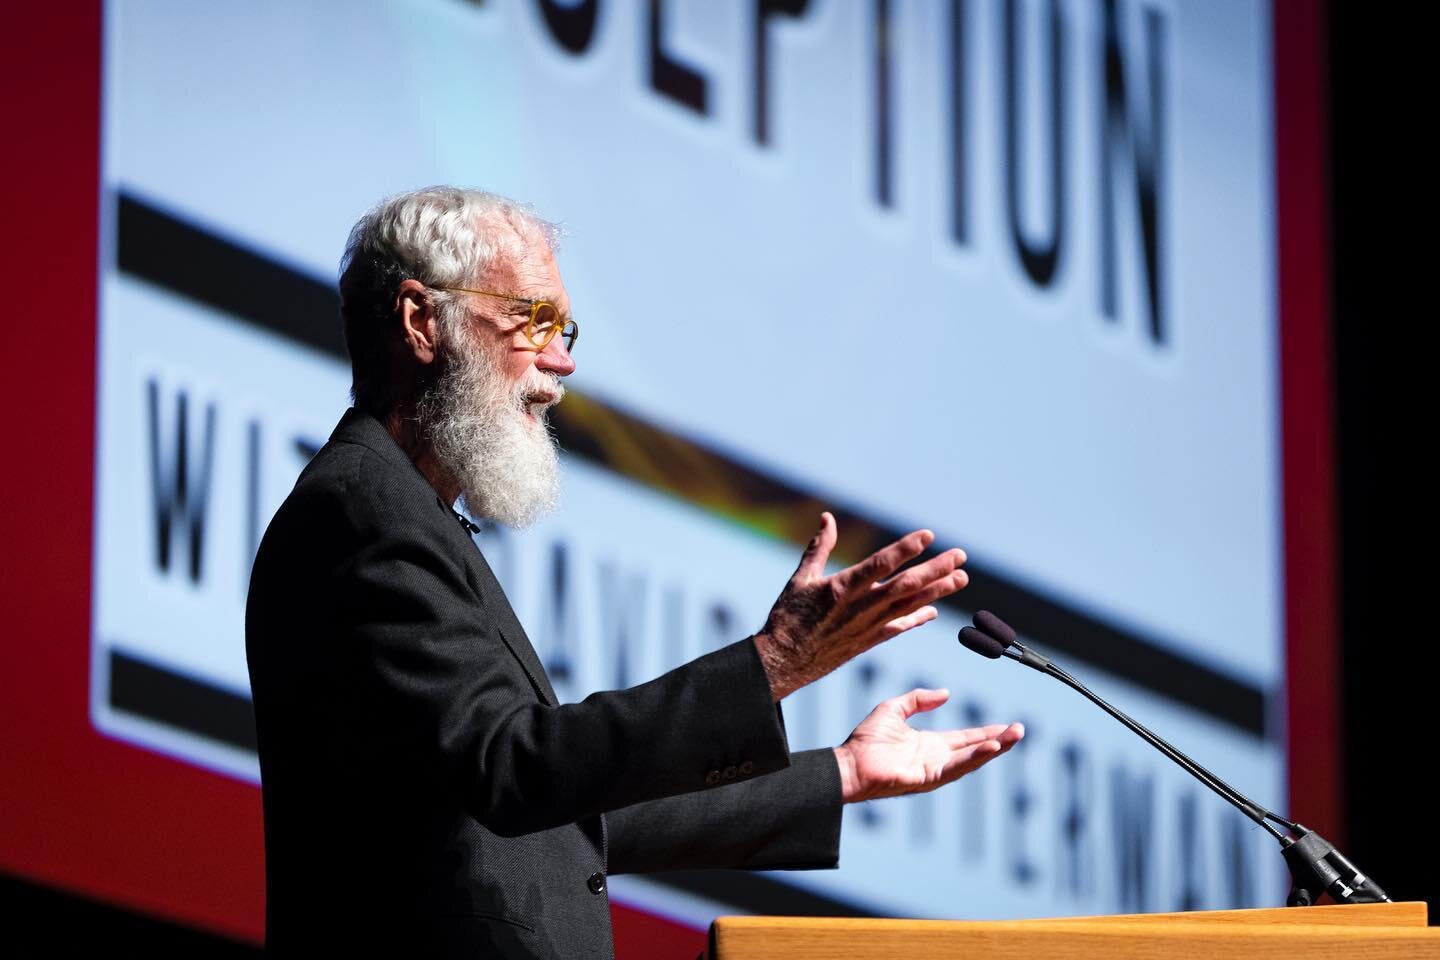 Ball State alumnus David Letterman returned on May 1, 2023 for a premiere of an original documentary created by Ball State students and featuring Letterman, about the art of glass. The premiere of &ldquo;Clear Reception&rdquo; was held in Emens Audit